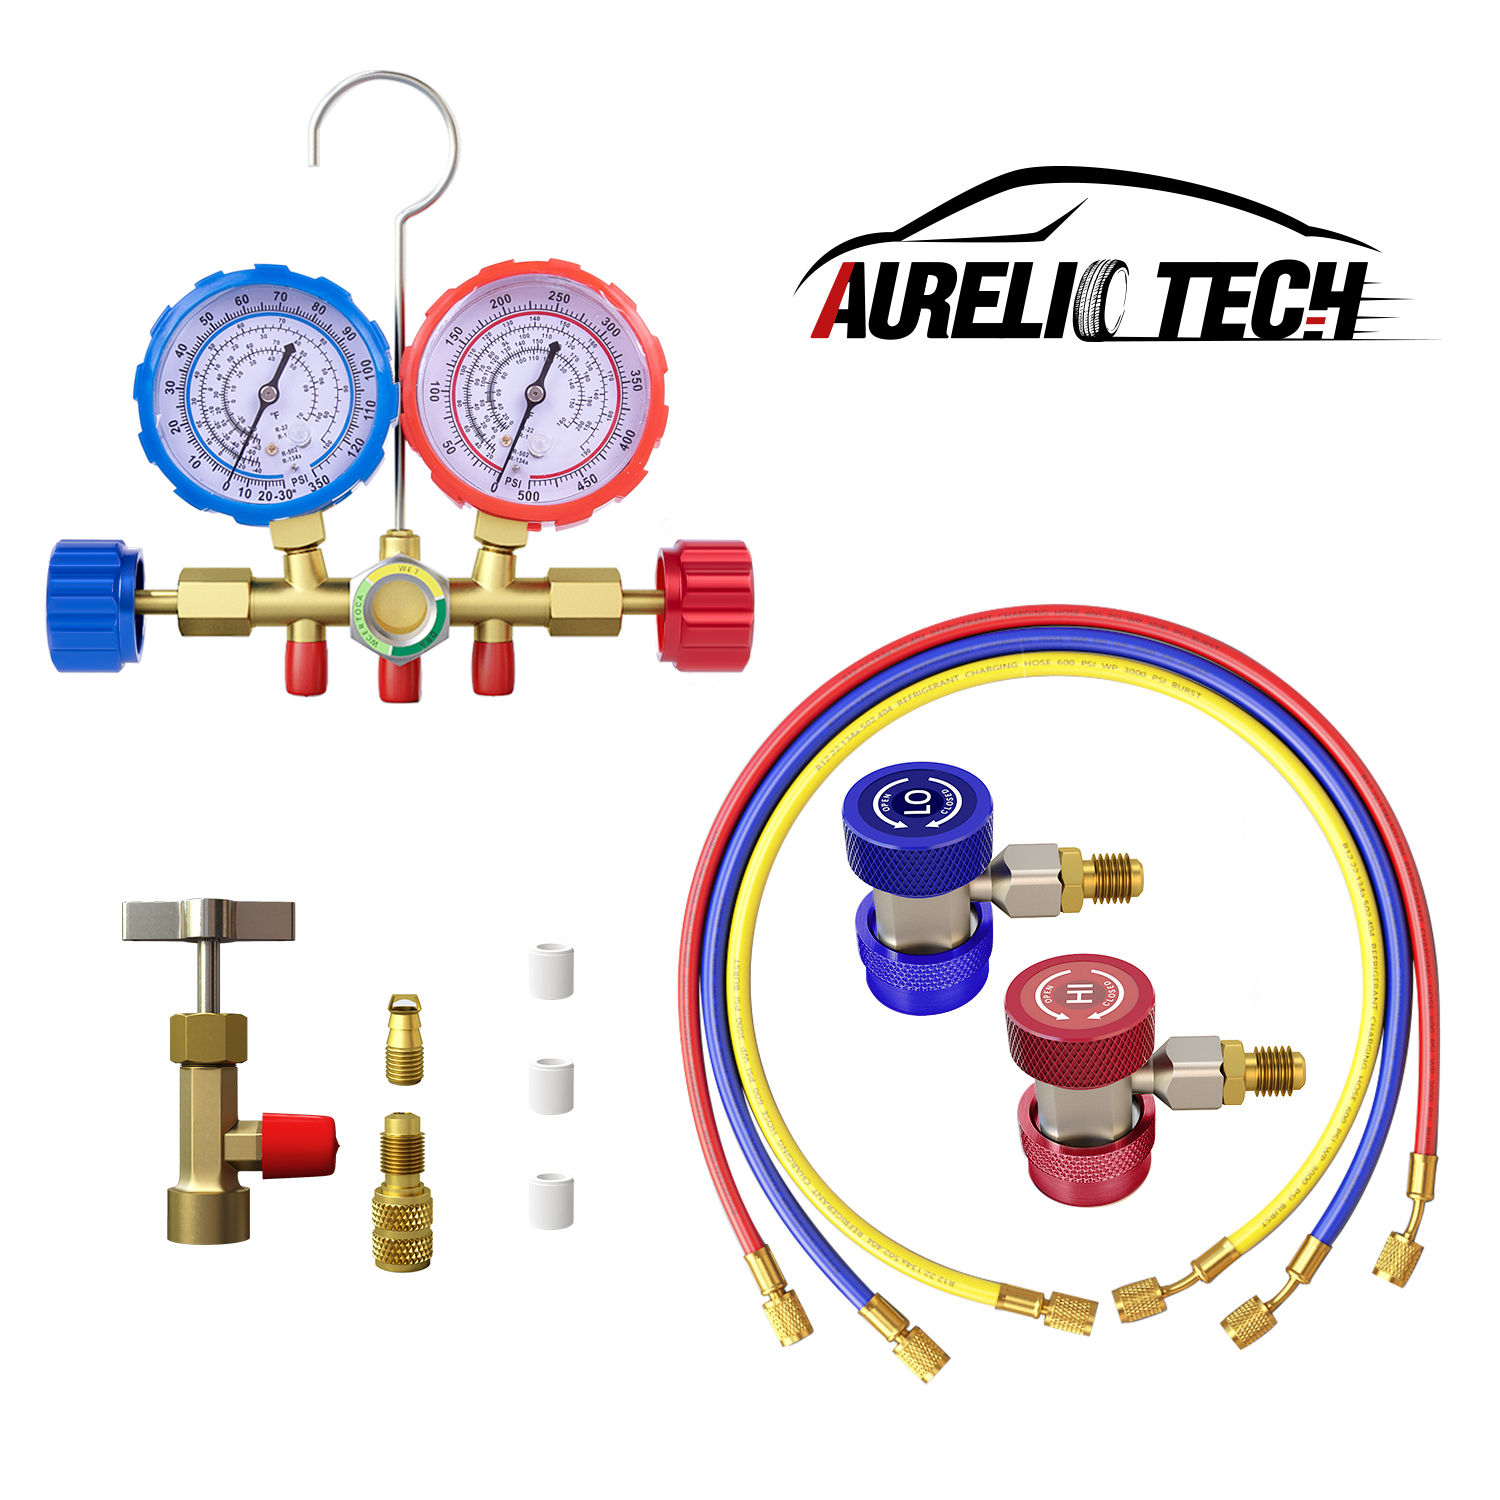 2022 UPGRATE Version Way AC Manifold Gauge Set, Fits R134A R12 R22 and R502  Refrigerants, with 5FT Hose, Acme Tank Adapters, Couplers and Can Tap 